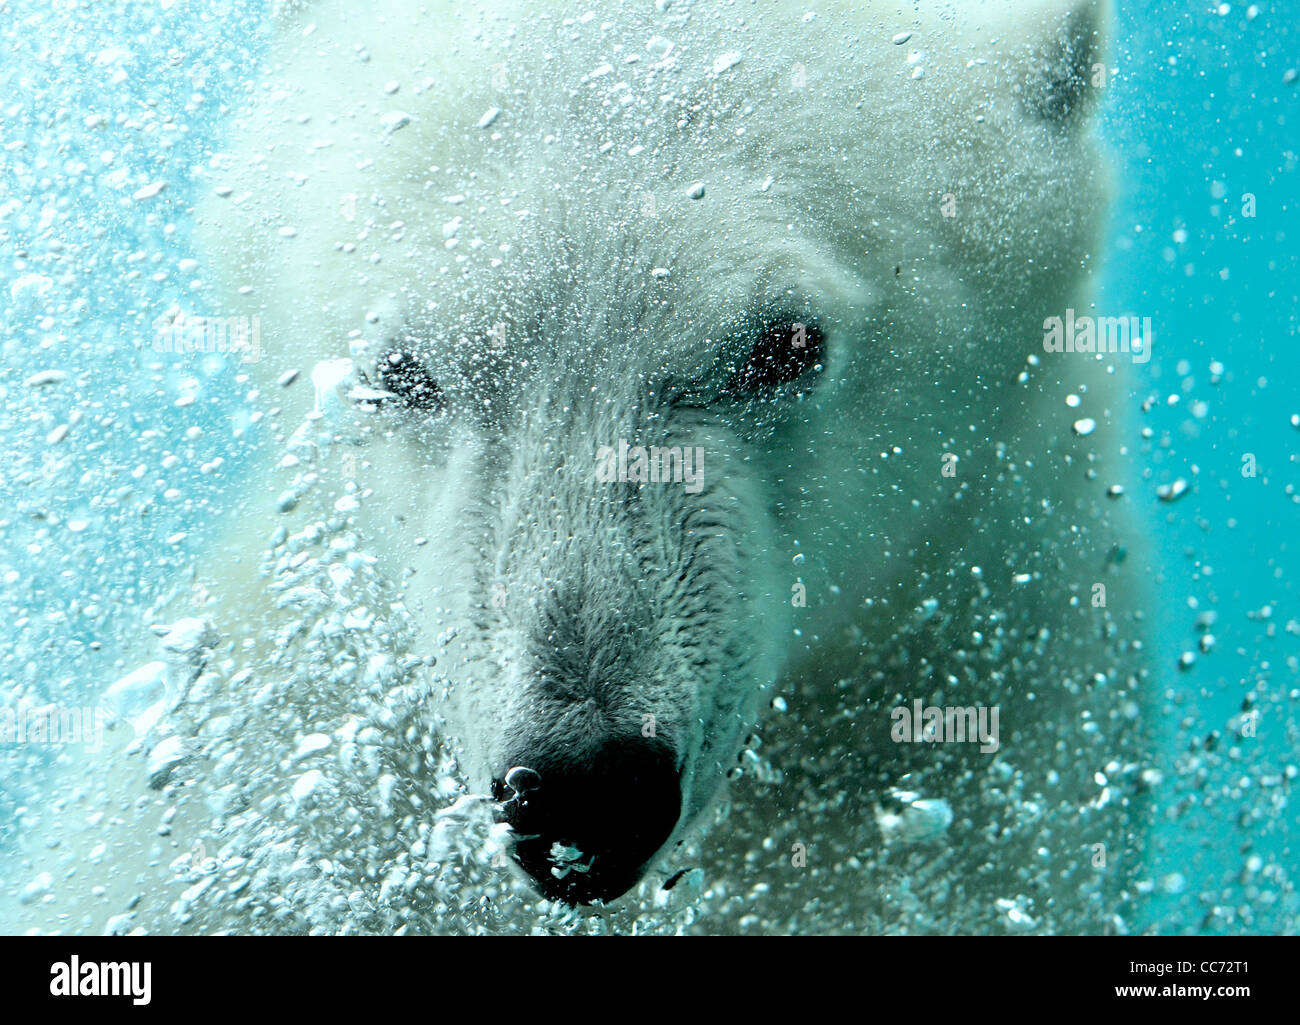 Close-up of Polar bear (Ursus maritimus) swimming underwater and blowing air bubbles Stock Photo